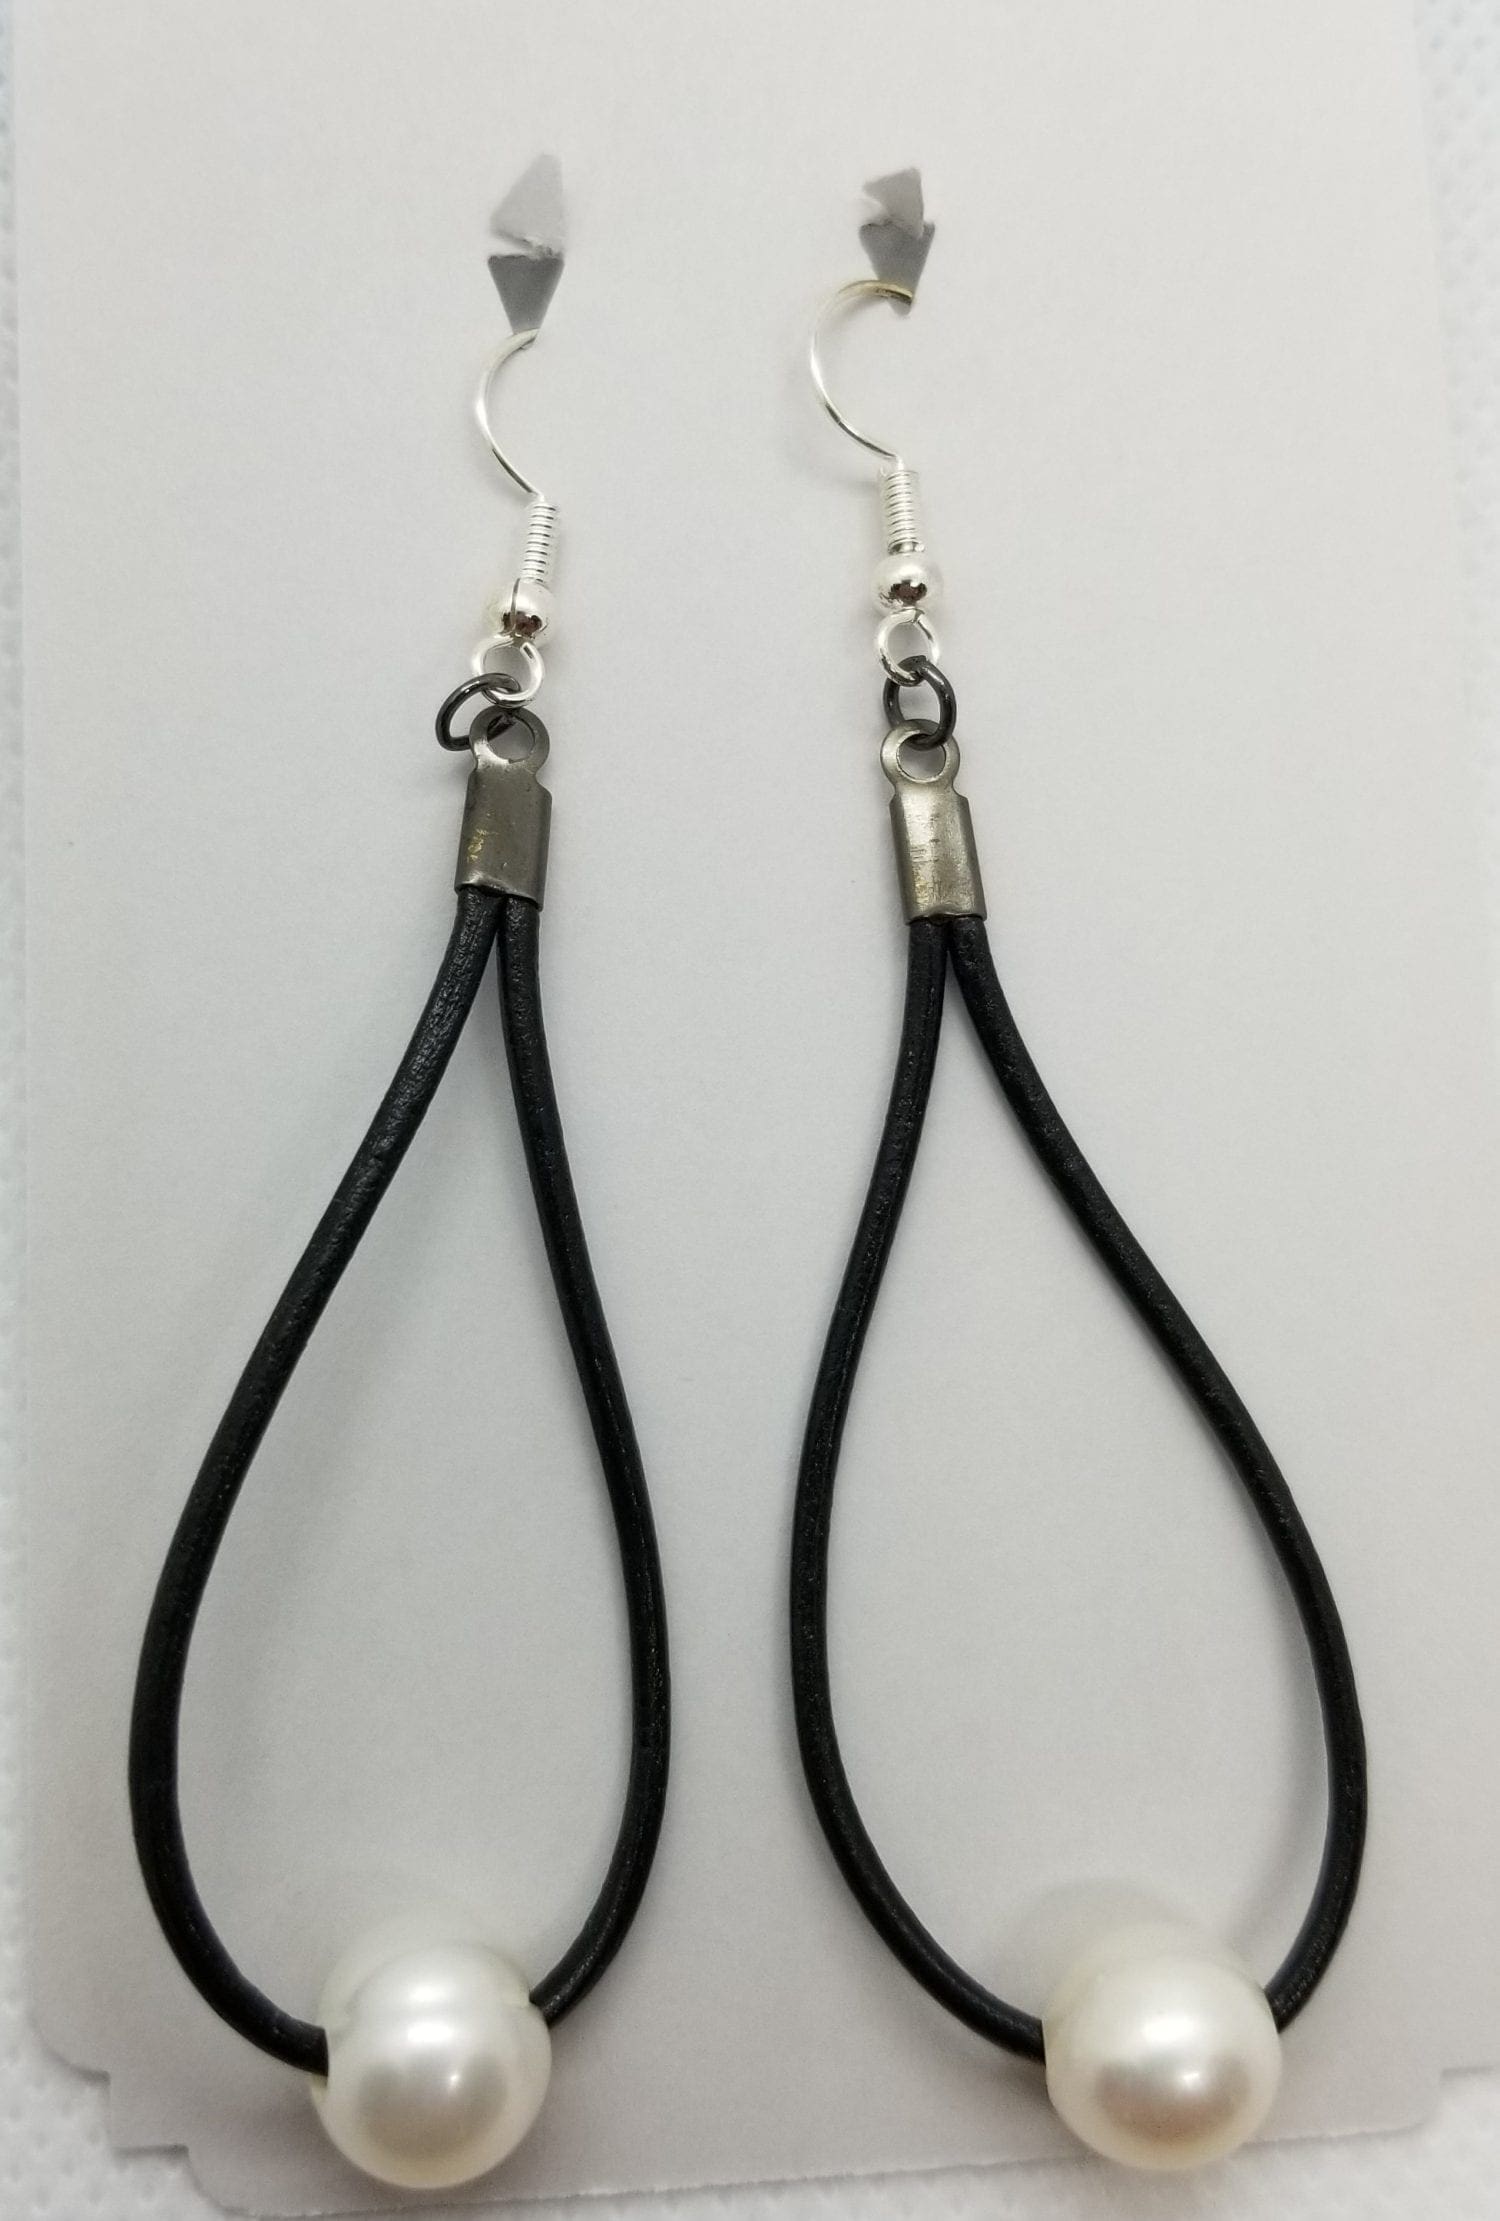 Featured image for “Black Leather Earrings”